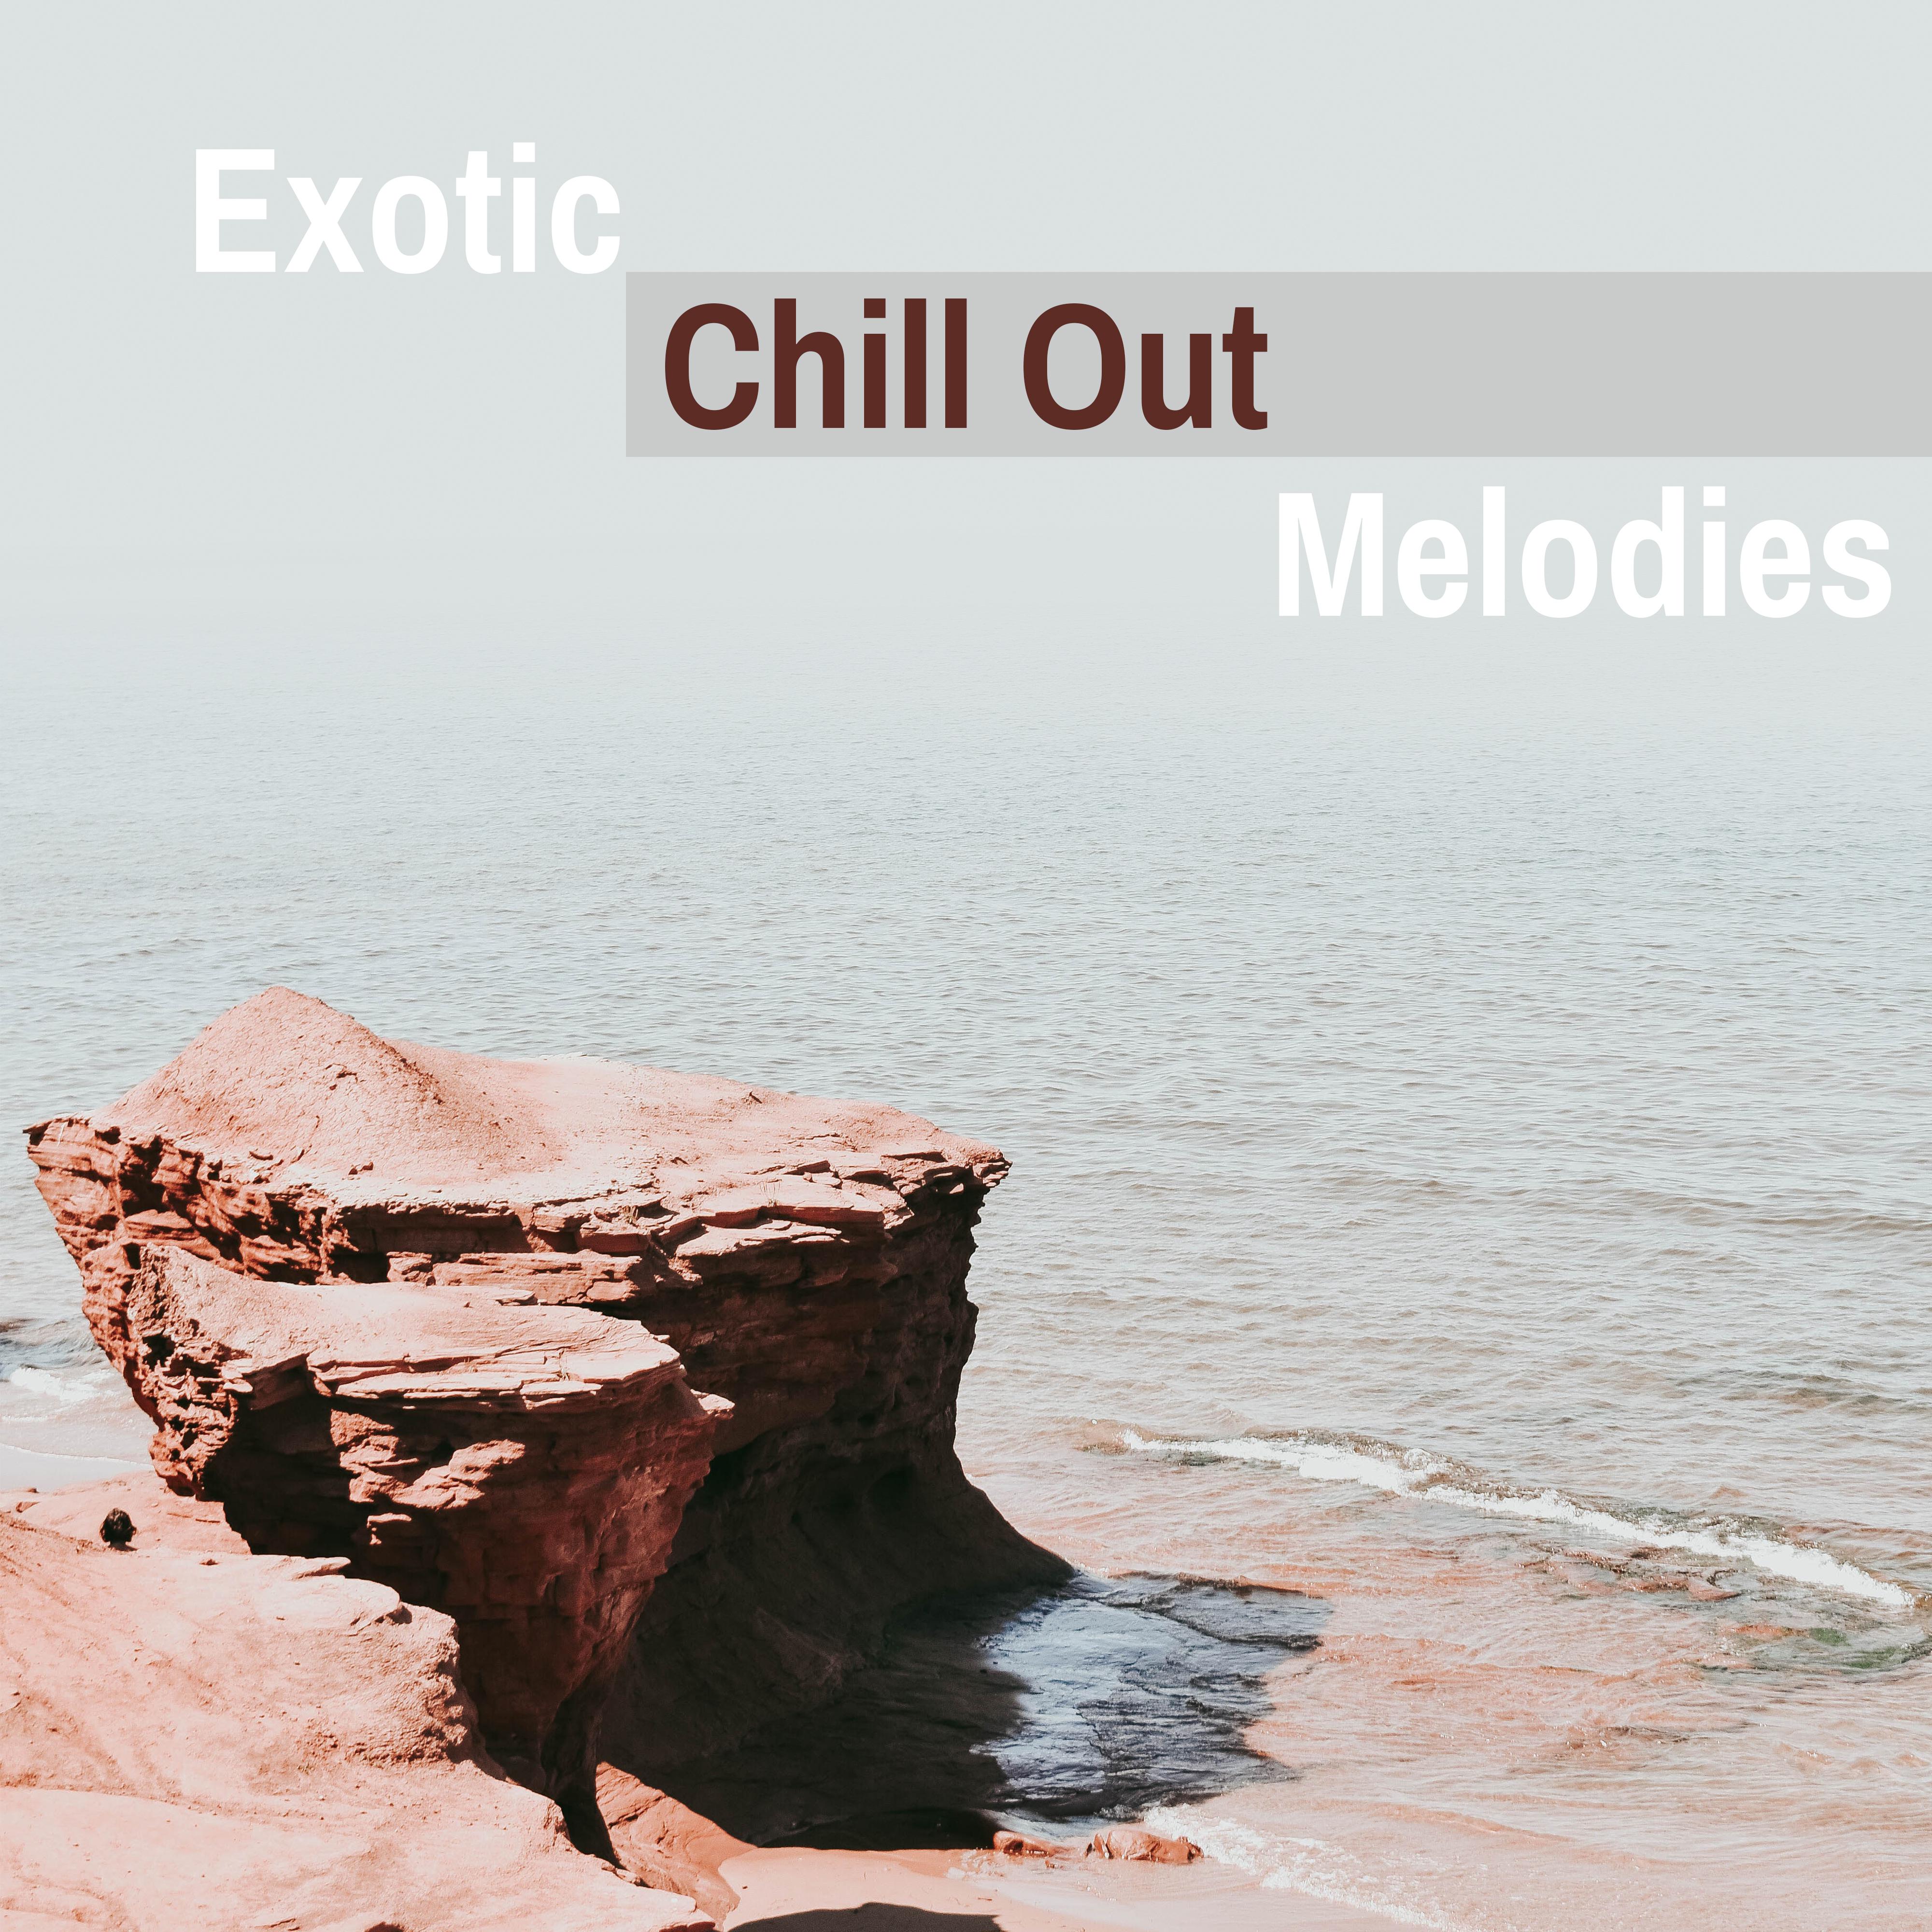 Exotic Chill Out Melodies  Tropical Chill Out Beats, Summer Vibes, Relaxing Melodies, Beach Lounge